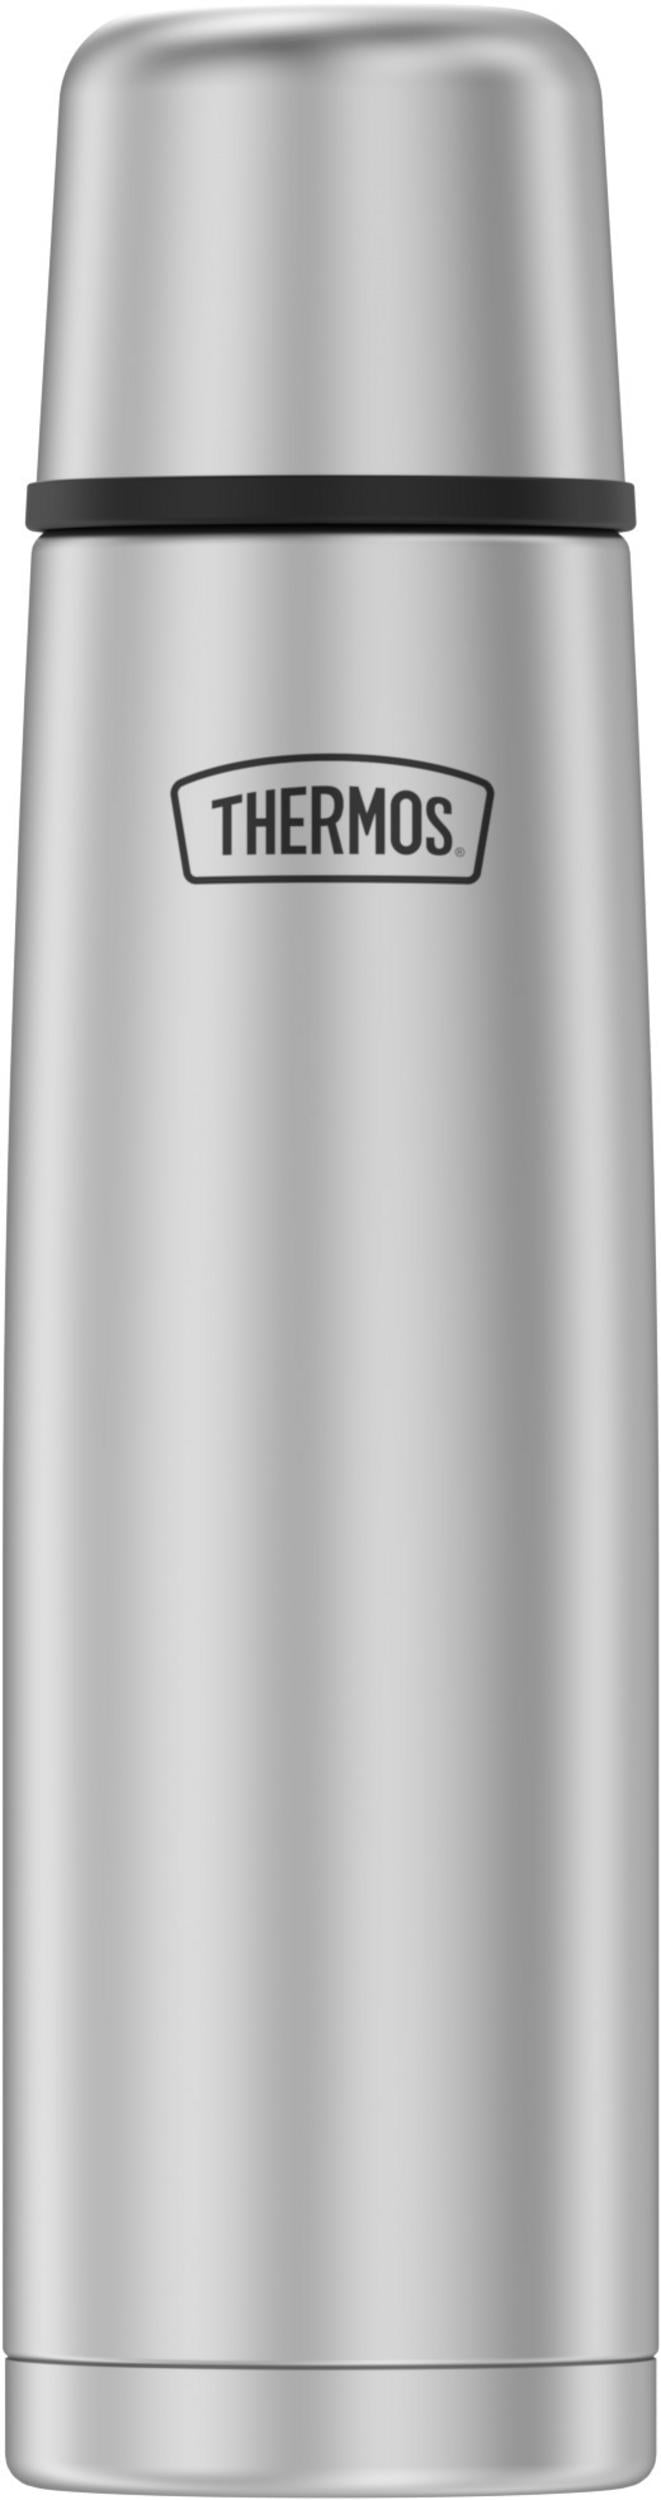 Thermos Vacuum Insulated 32 oz Stainless Steel Compact Beverage Bottle - 2  lb - Vacuum - Stainless Steel 